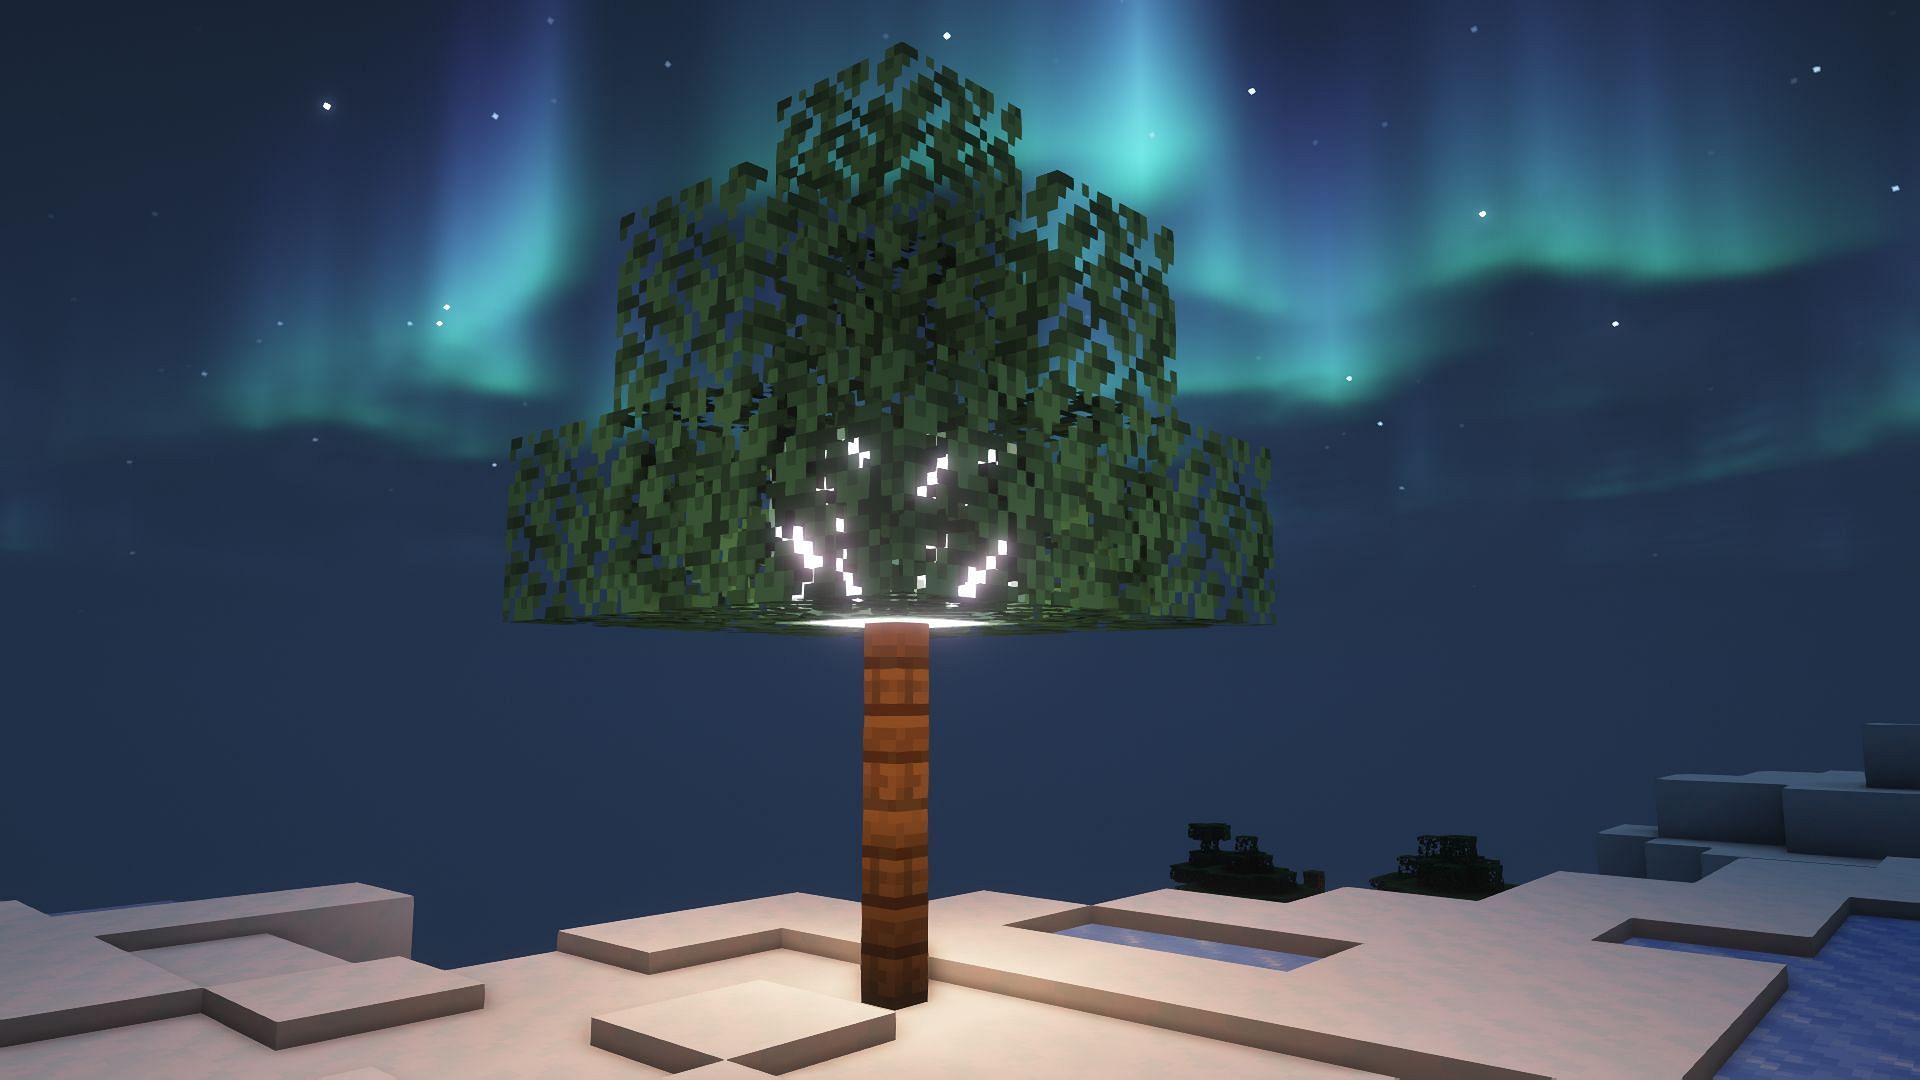 Users can place any light block and surround it with tree leaves in Minecraft (Image via Mojang)